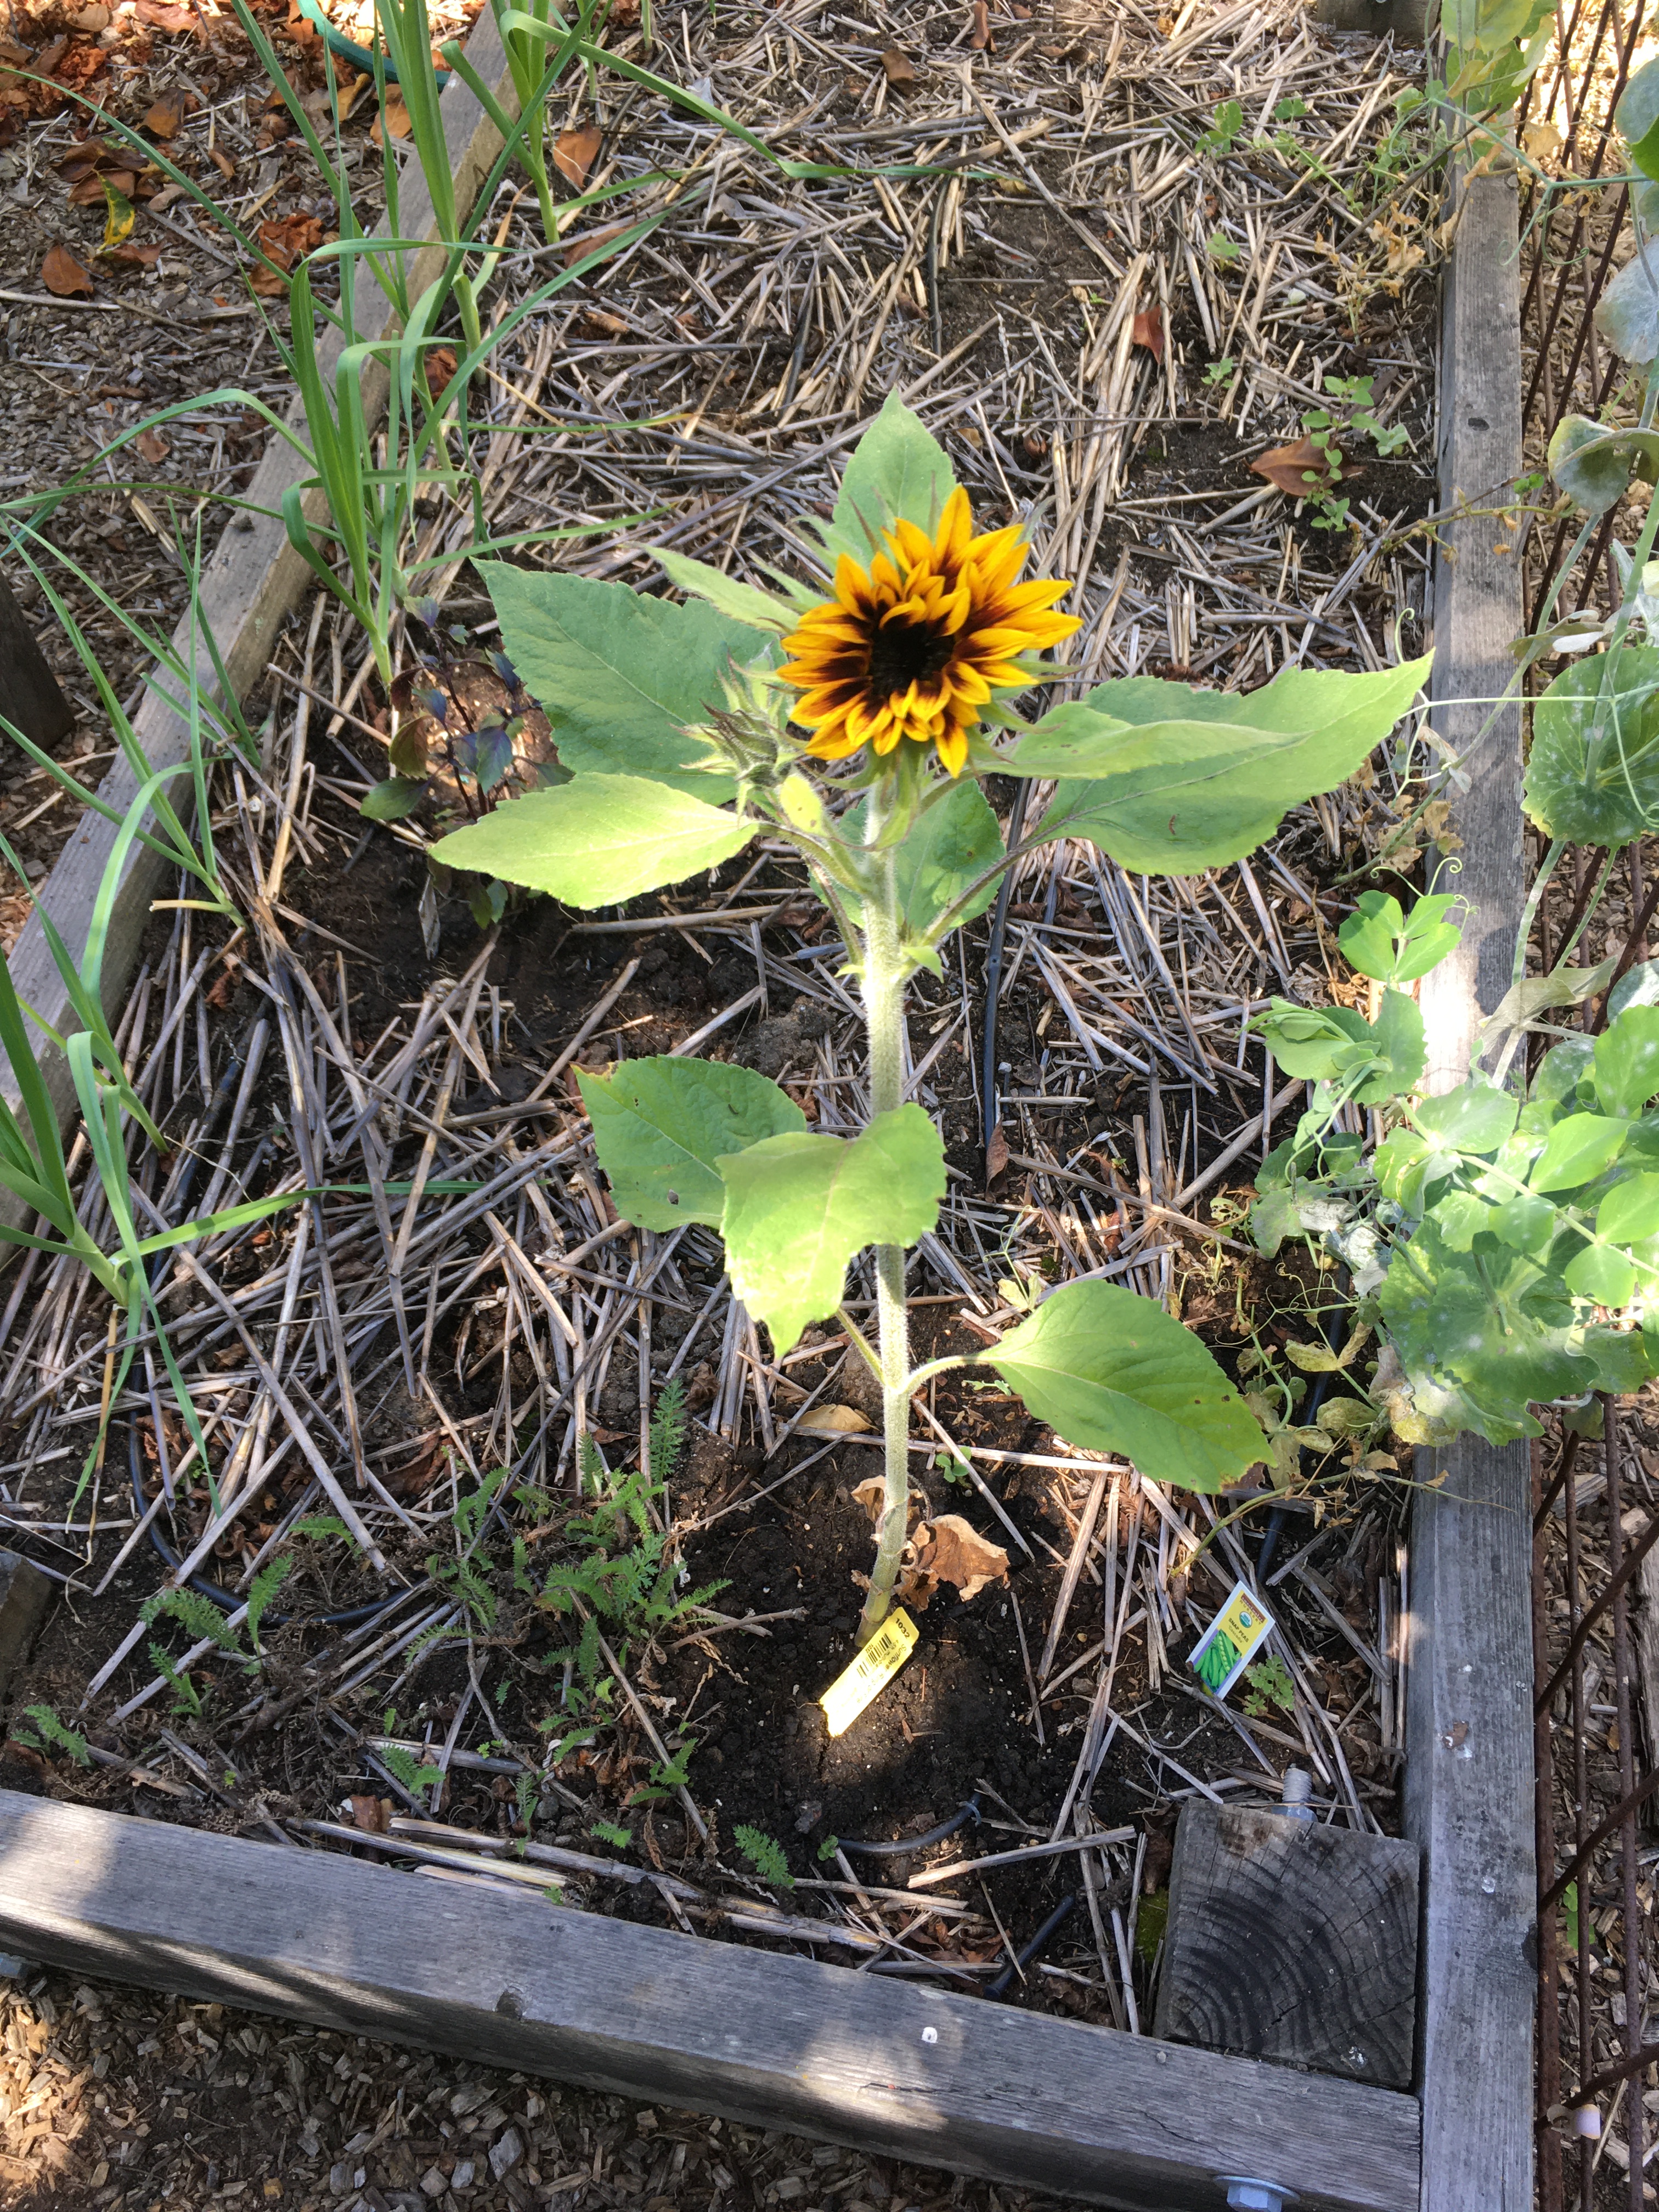 Photo of a young sunflower plant in a wooden planter box